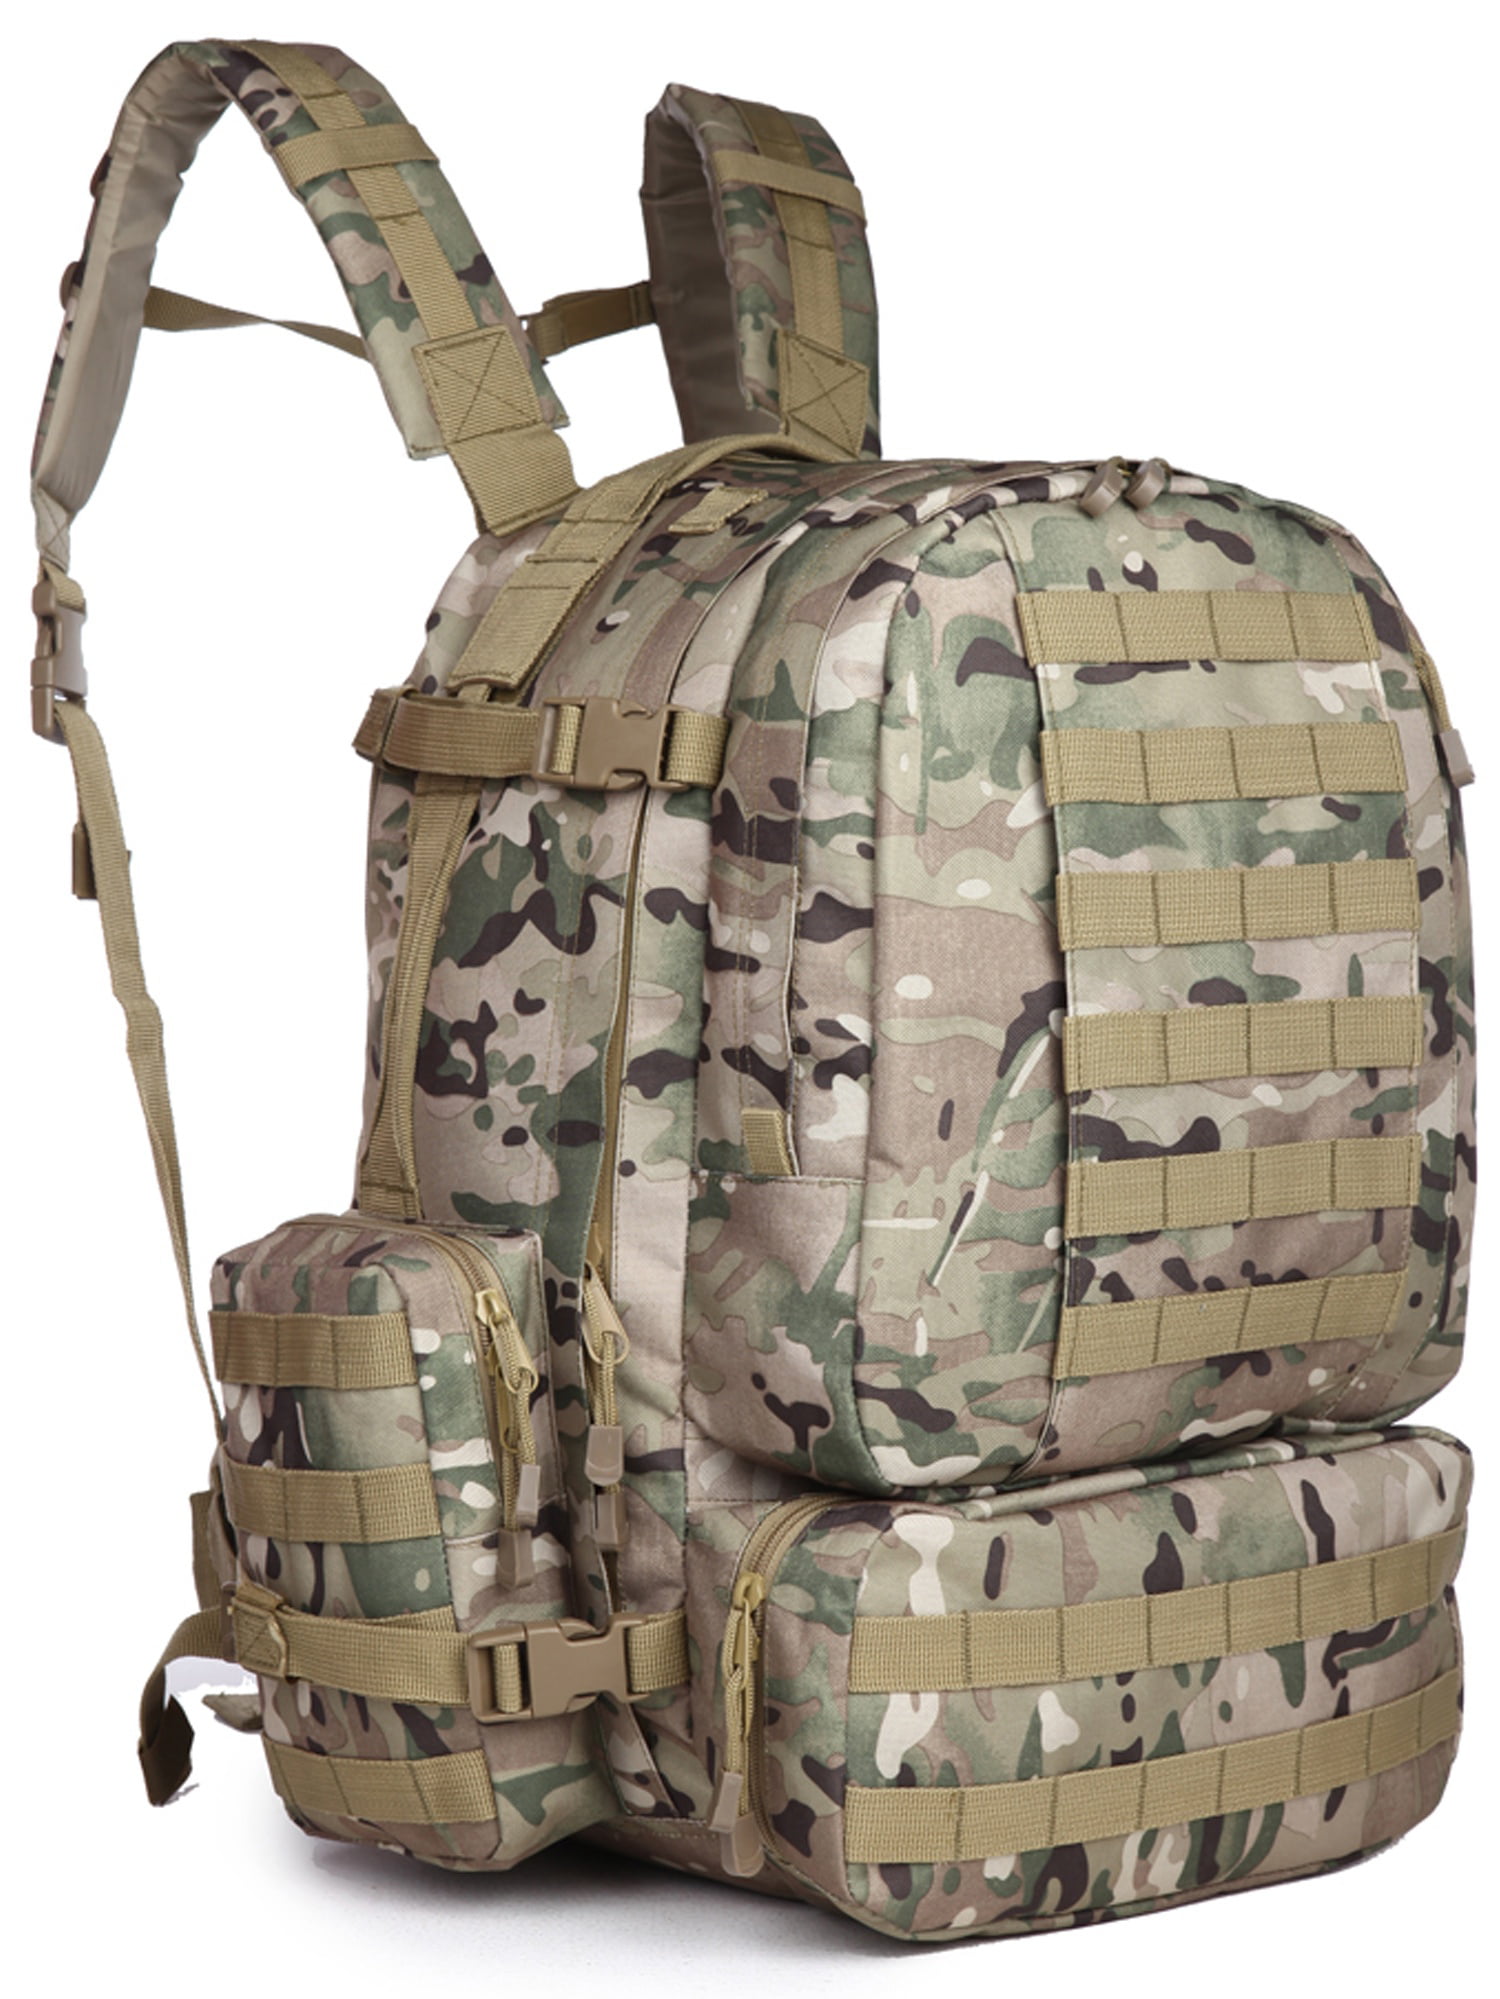 NEW 60L Large Tactical Military Molle Backpack Bag Outdoor Camping Rucksack UK